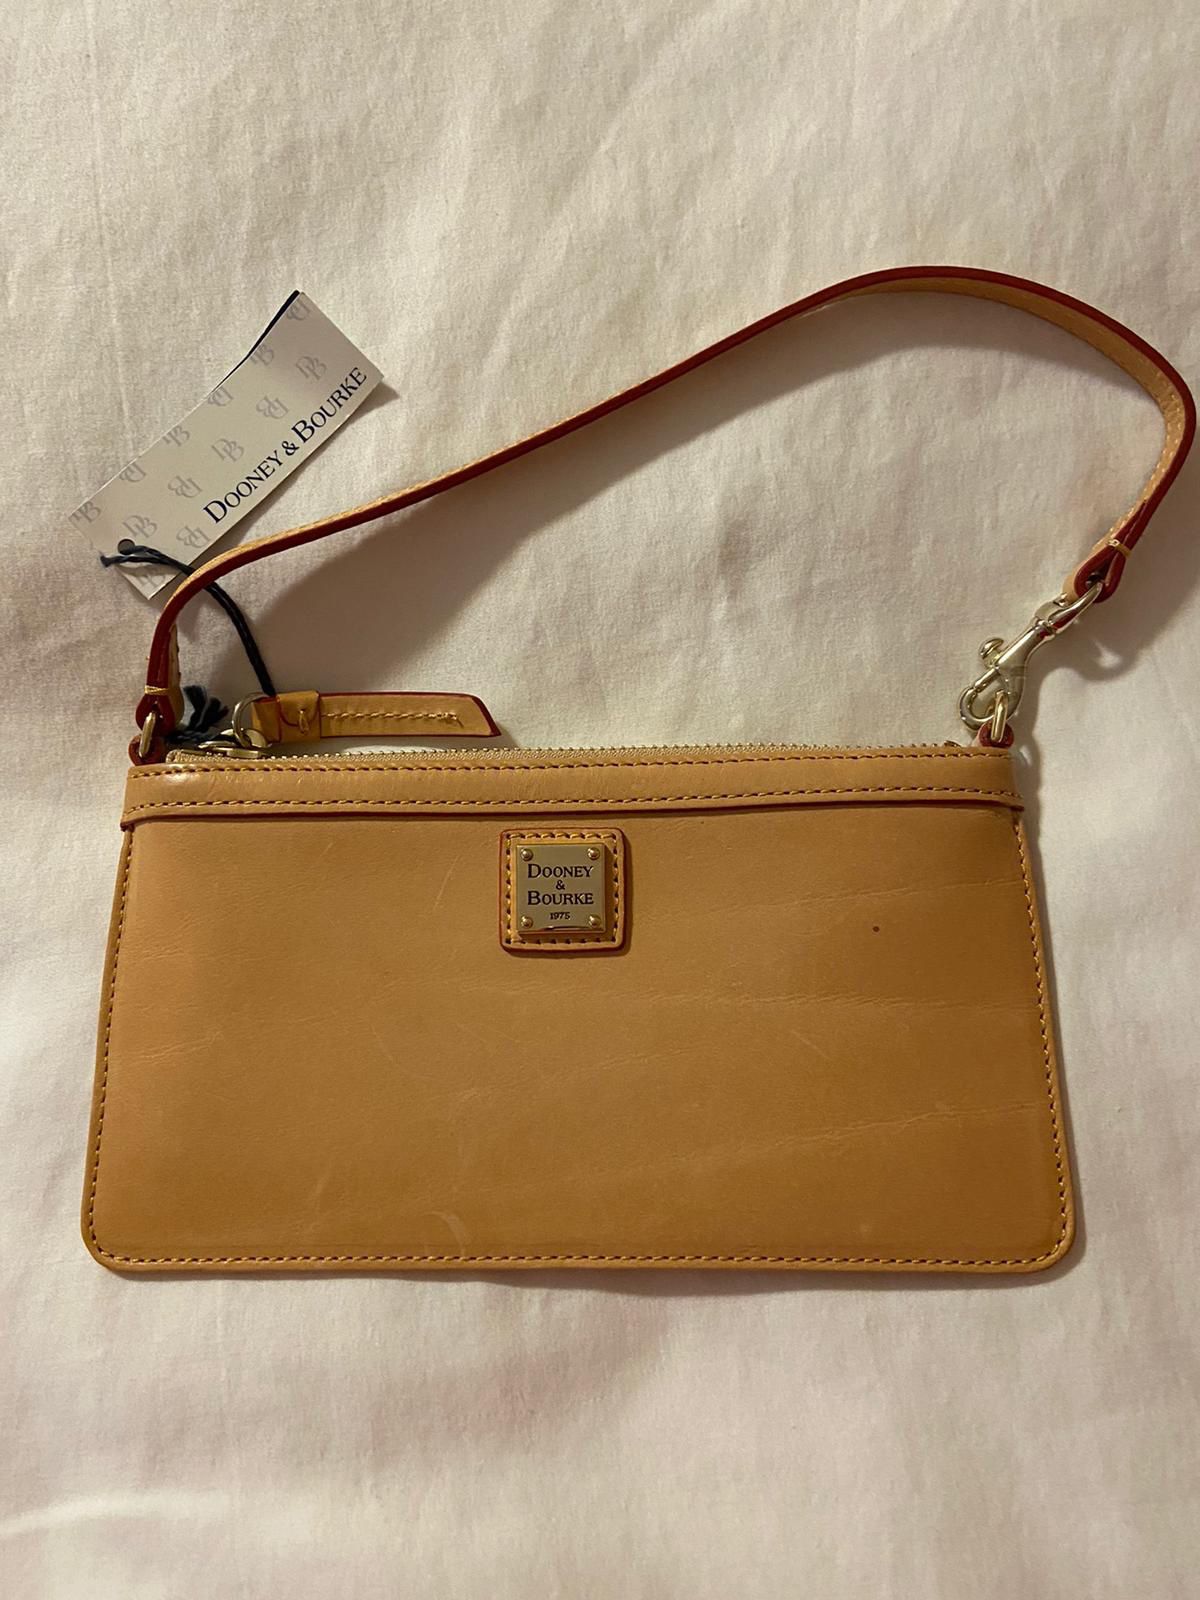 Dooney & Bourke wristlet new with tags